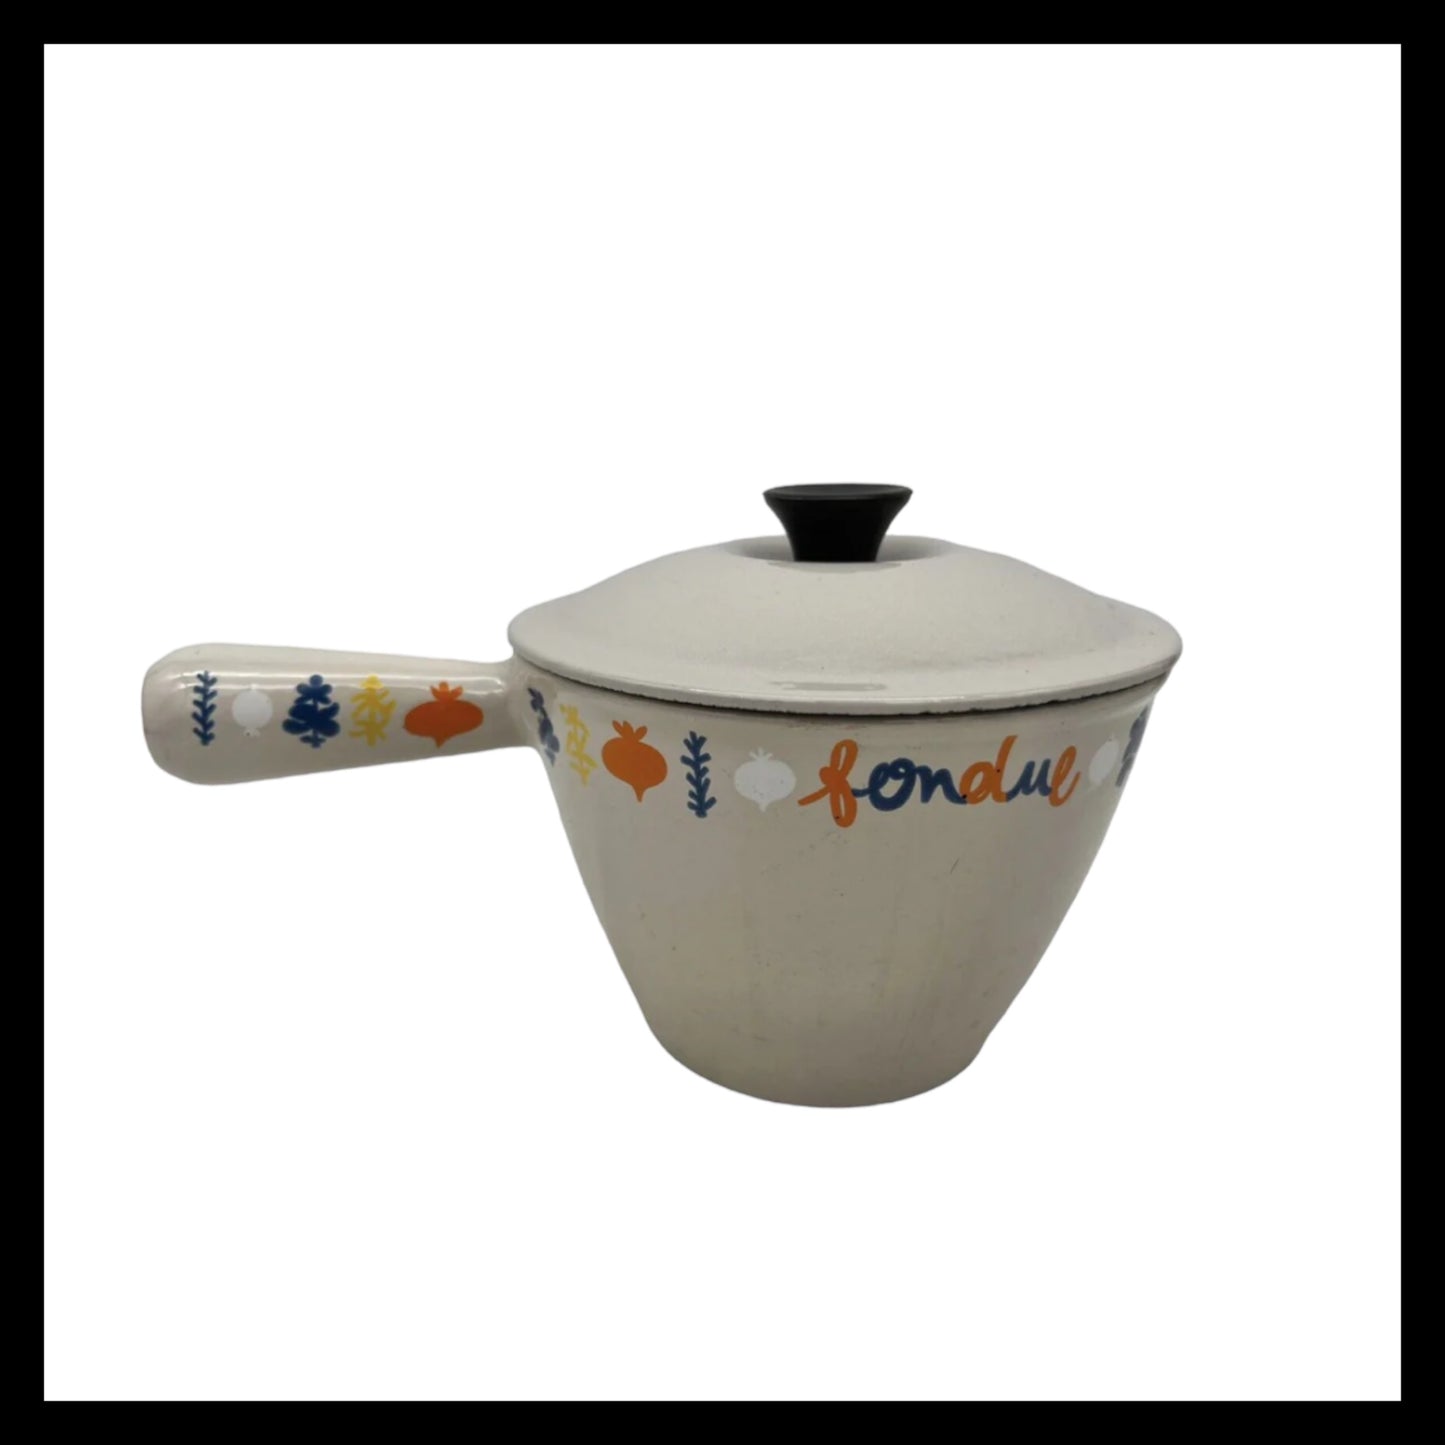 image French vintage Le Creuset fondue pot saucepan and lid sold by All Things French Store